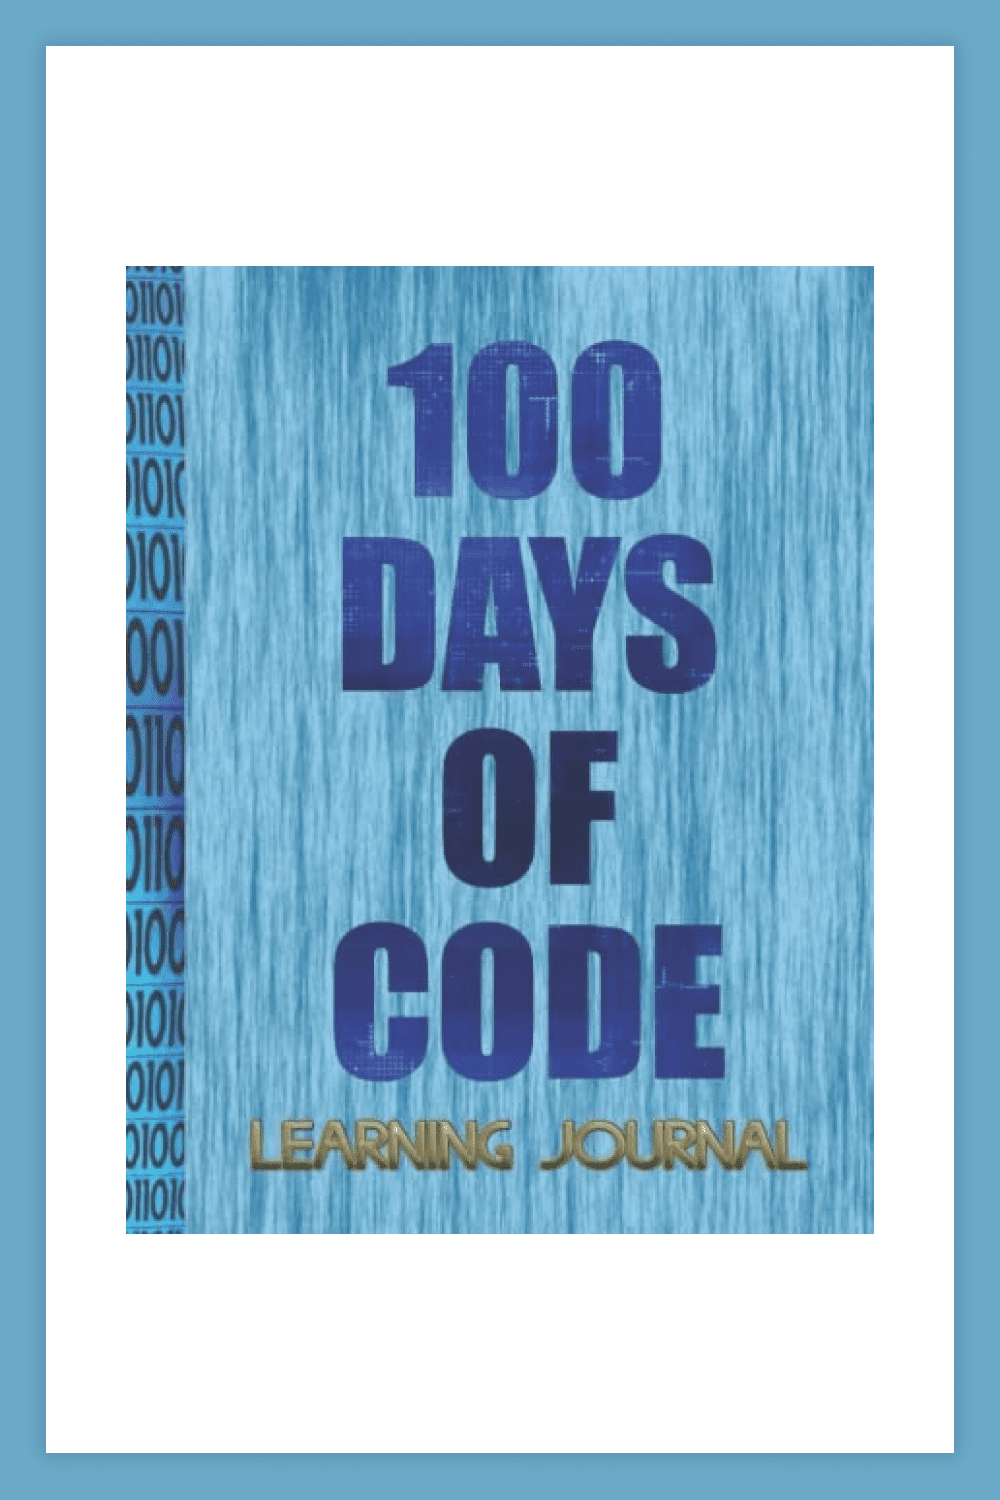 The cover of the book 100 Days of Code Learning Journal.